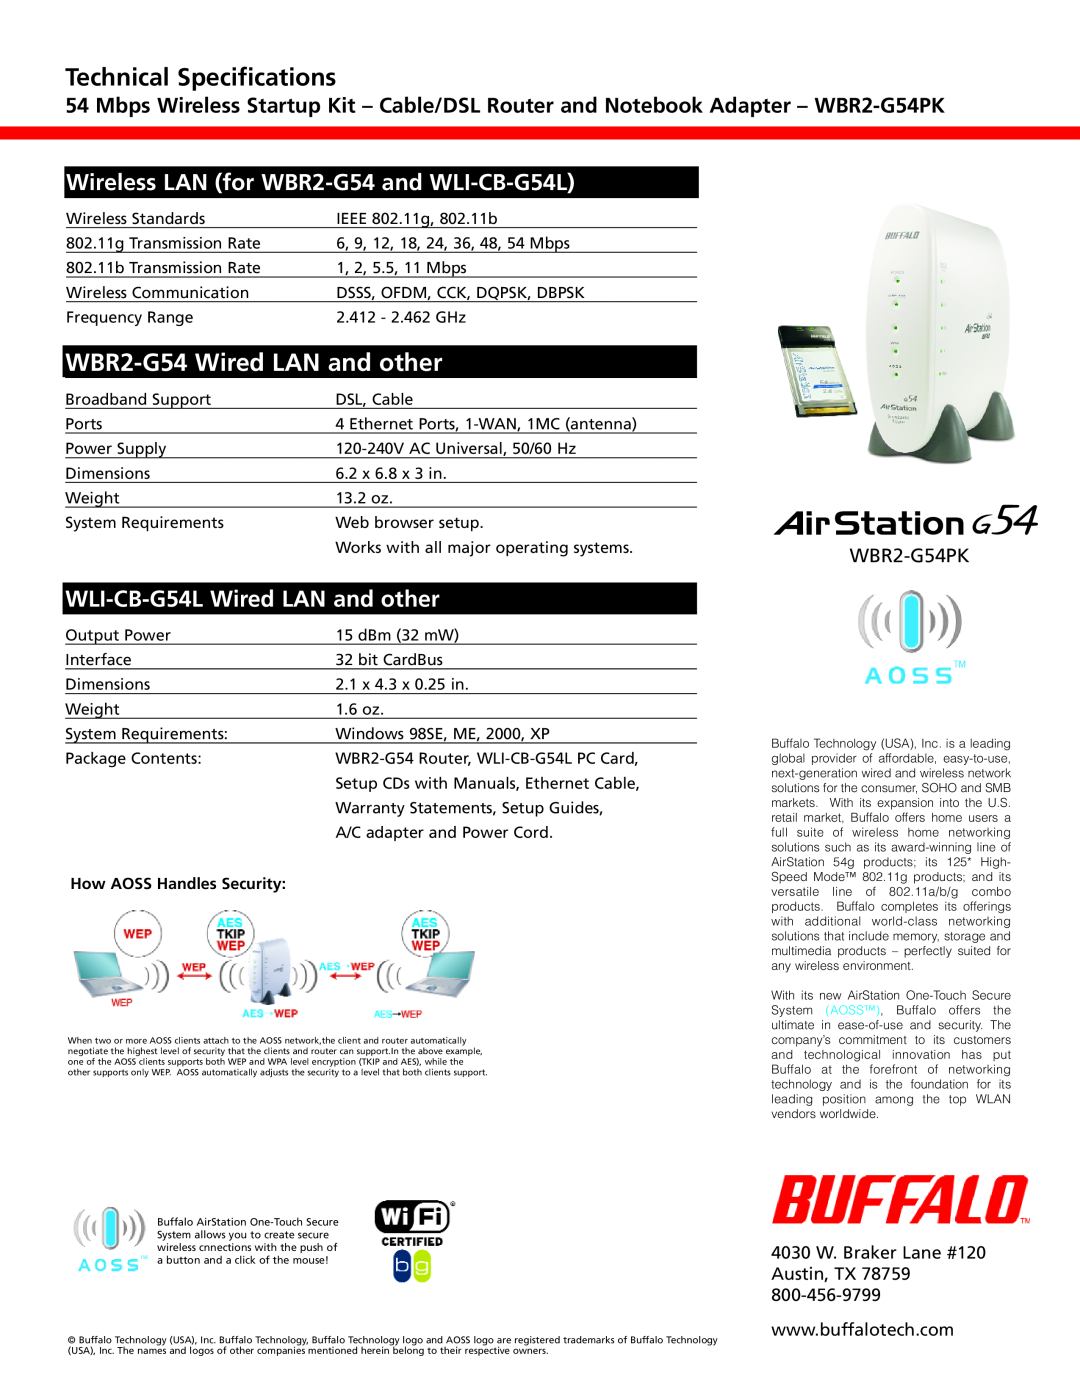 Buffalo Technology WBR2-G54PK Technical Specifications, WBR2-G54 Wired LAN and other, WLI-CB-G54L Wired LAN and other 